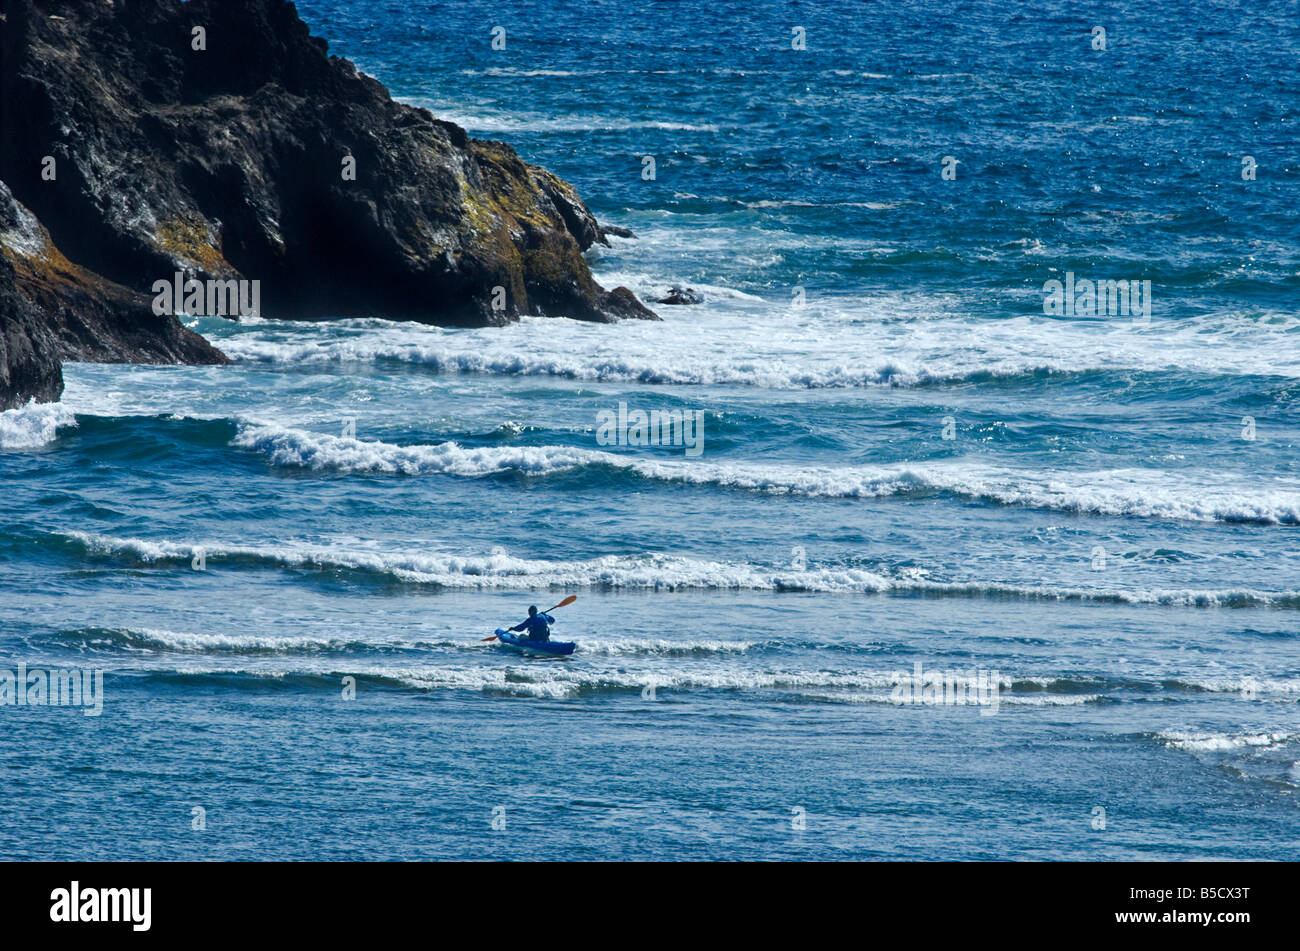 Person in kayak off the Northern California Coast in Pacific Ocean Stock Photo